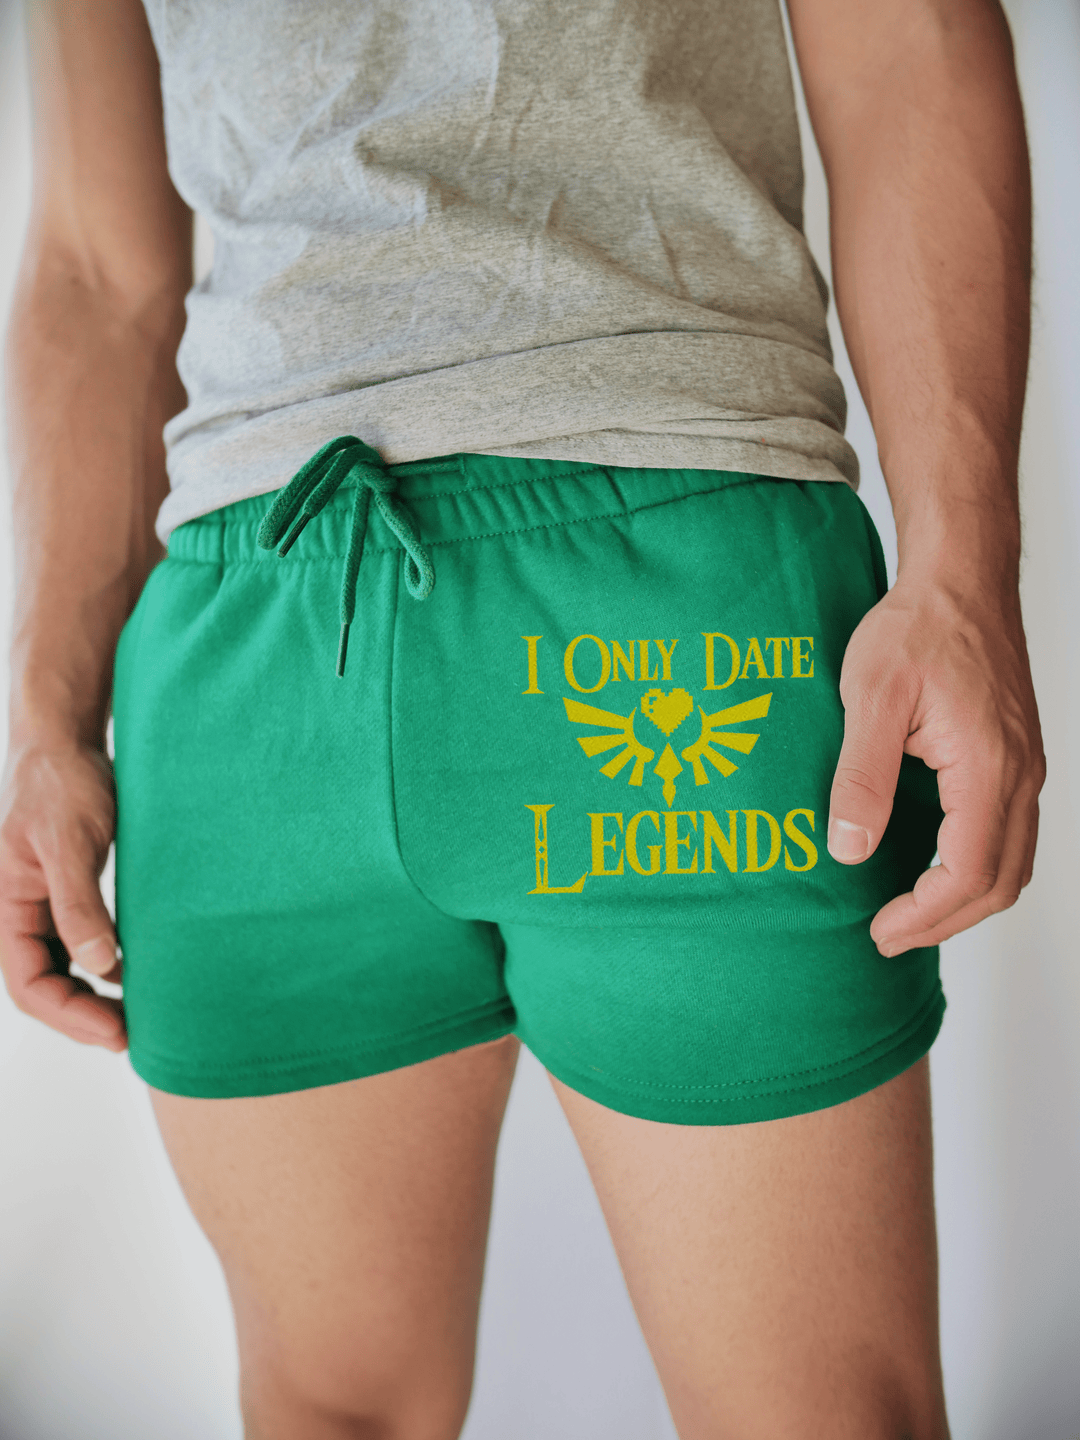 PixelThat Punderwear Shorts Kelly Green / S / Front I Only Date Legends Men's Gym Shorts